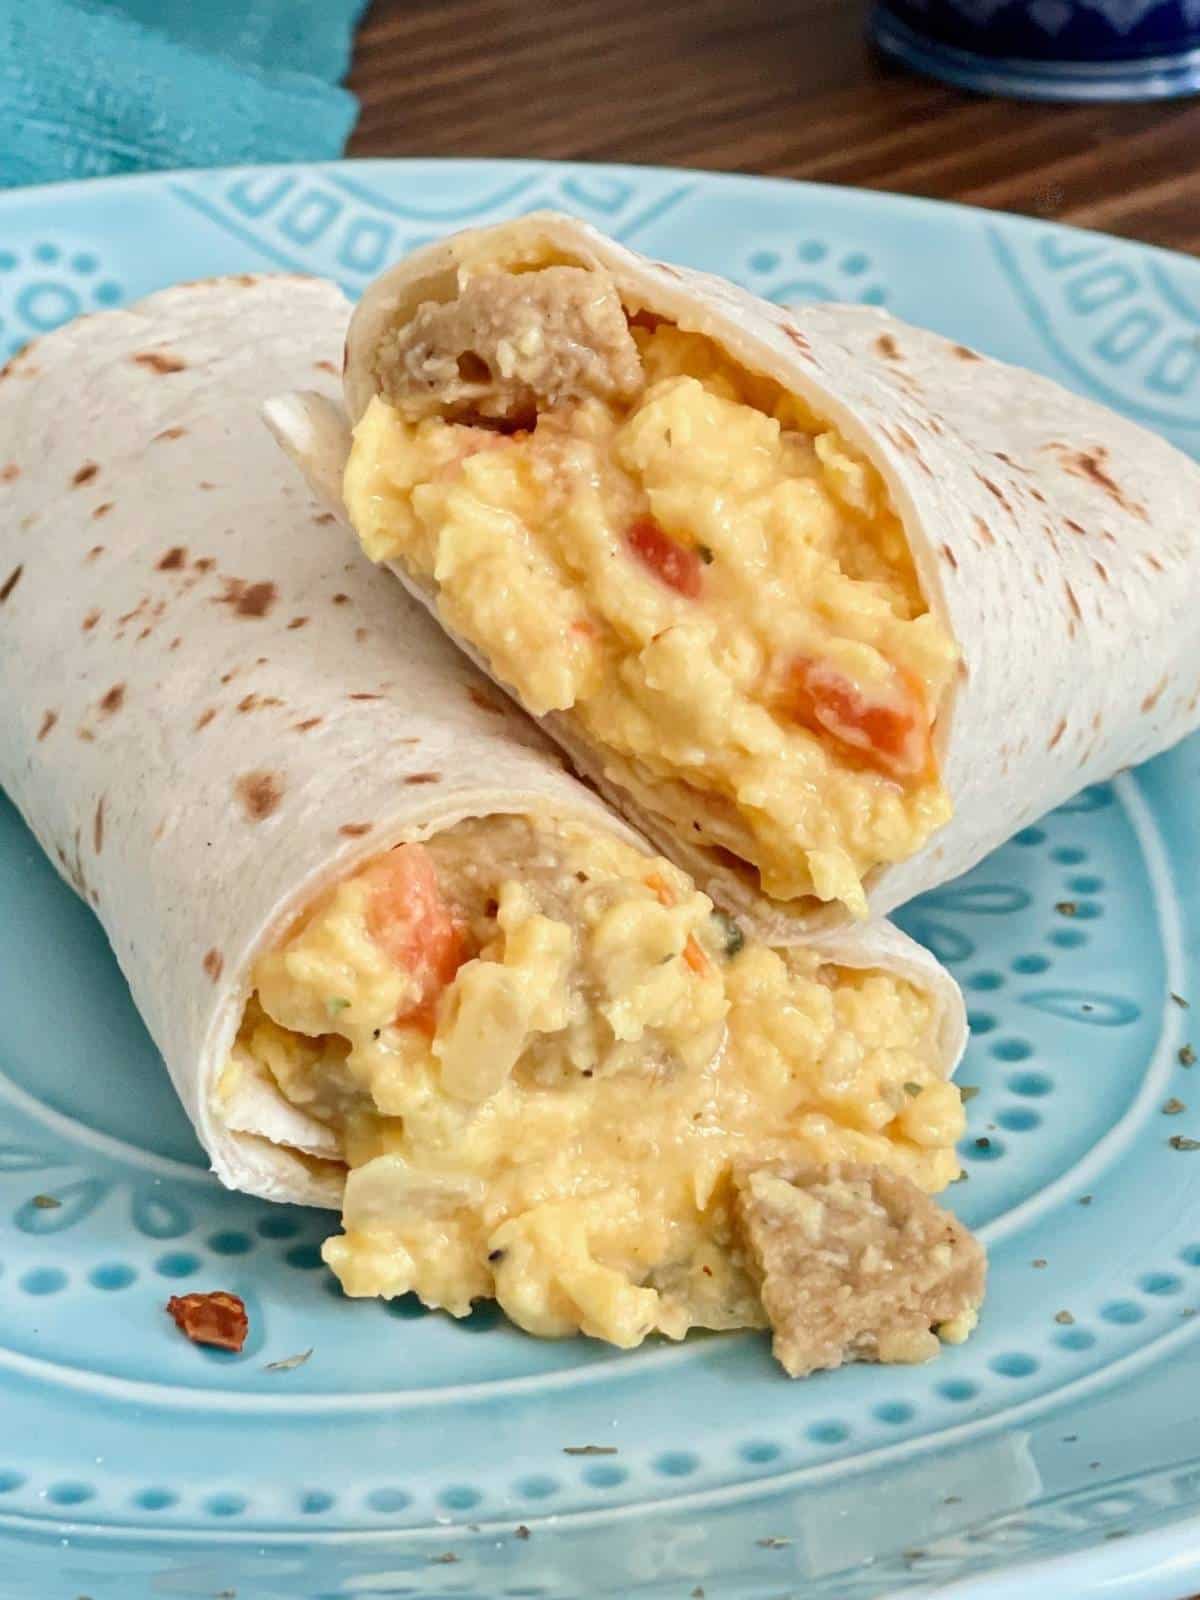 finished breakfast burrito zoomed in